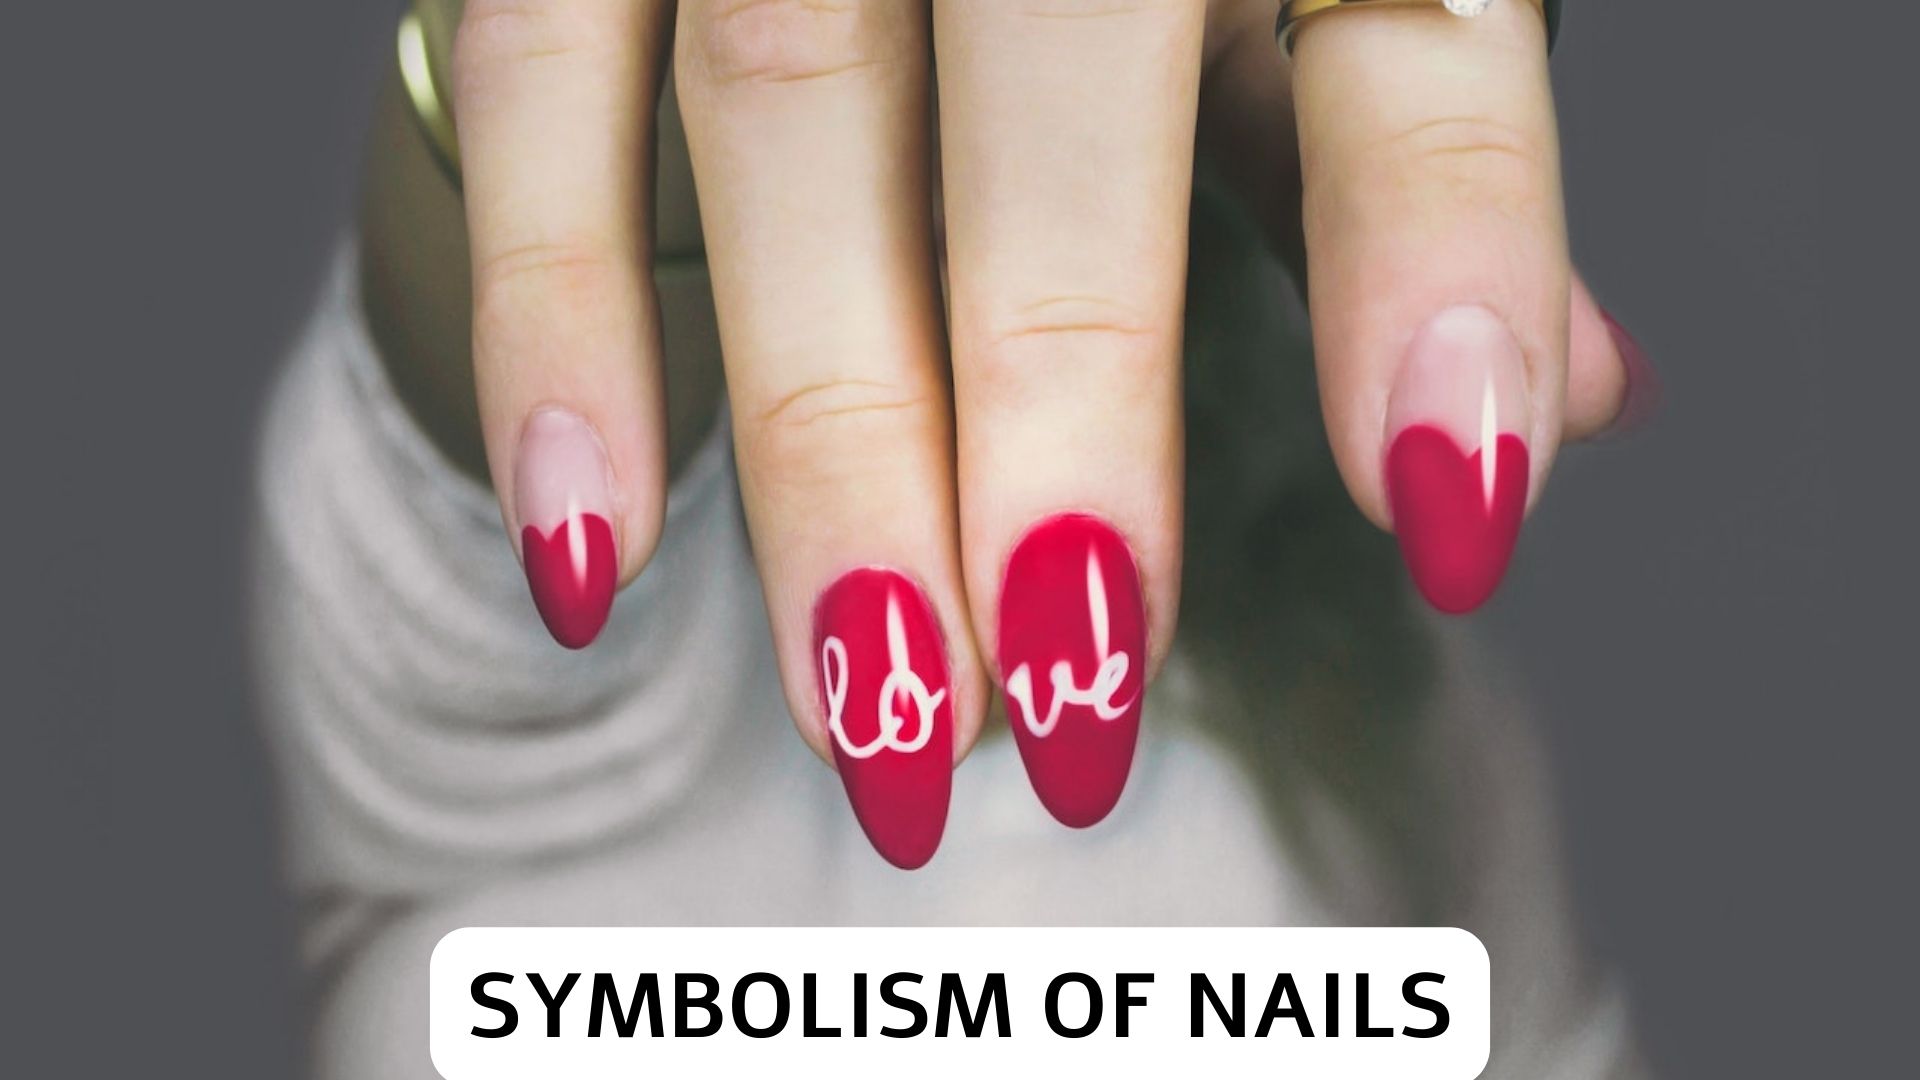 Symbolism Of Nails - Represents Absolute Trust And Fierce Competition